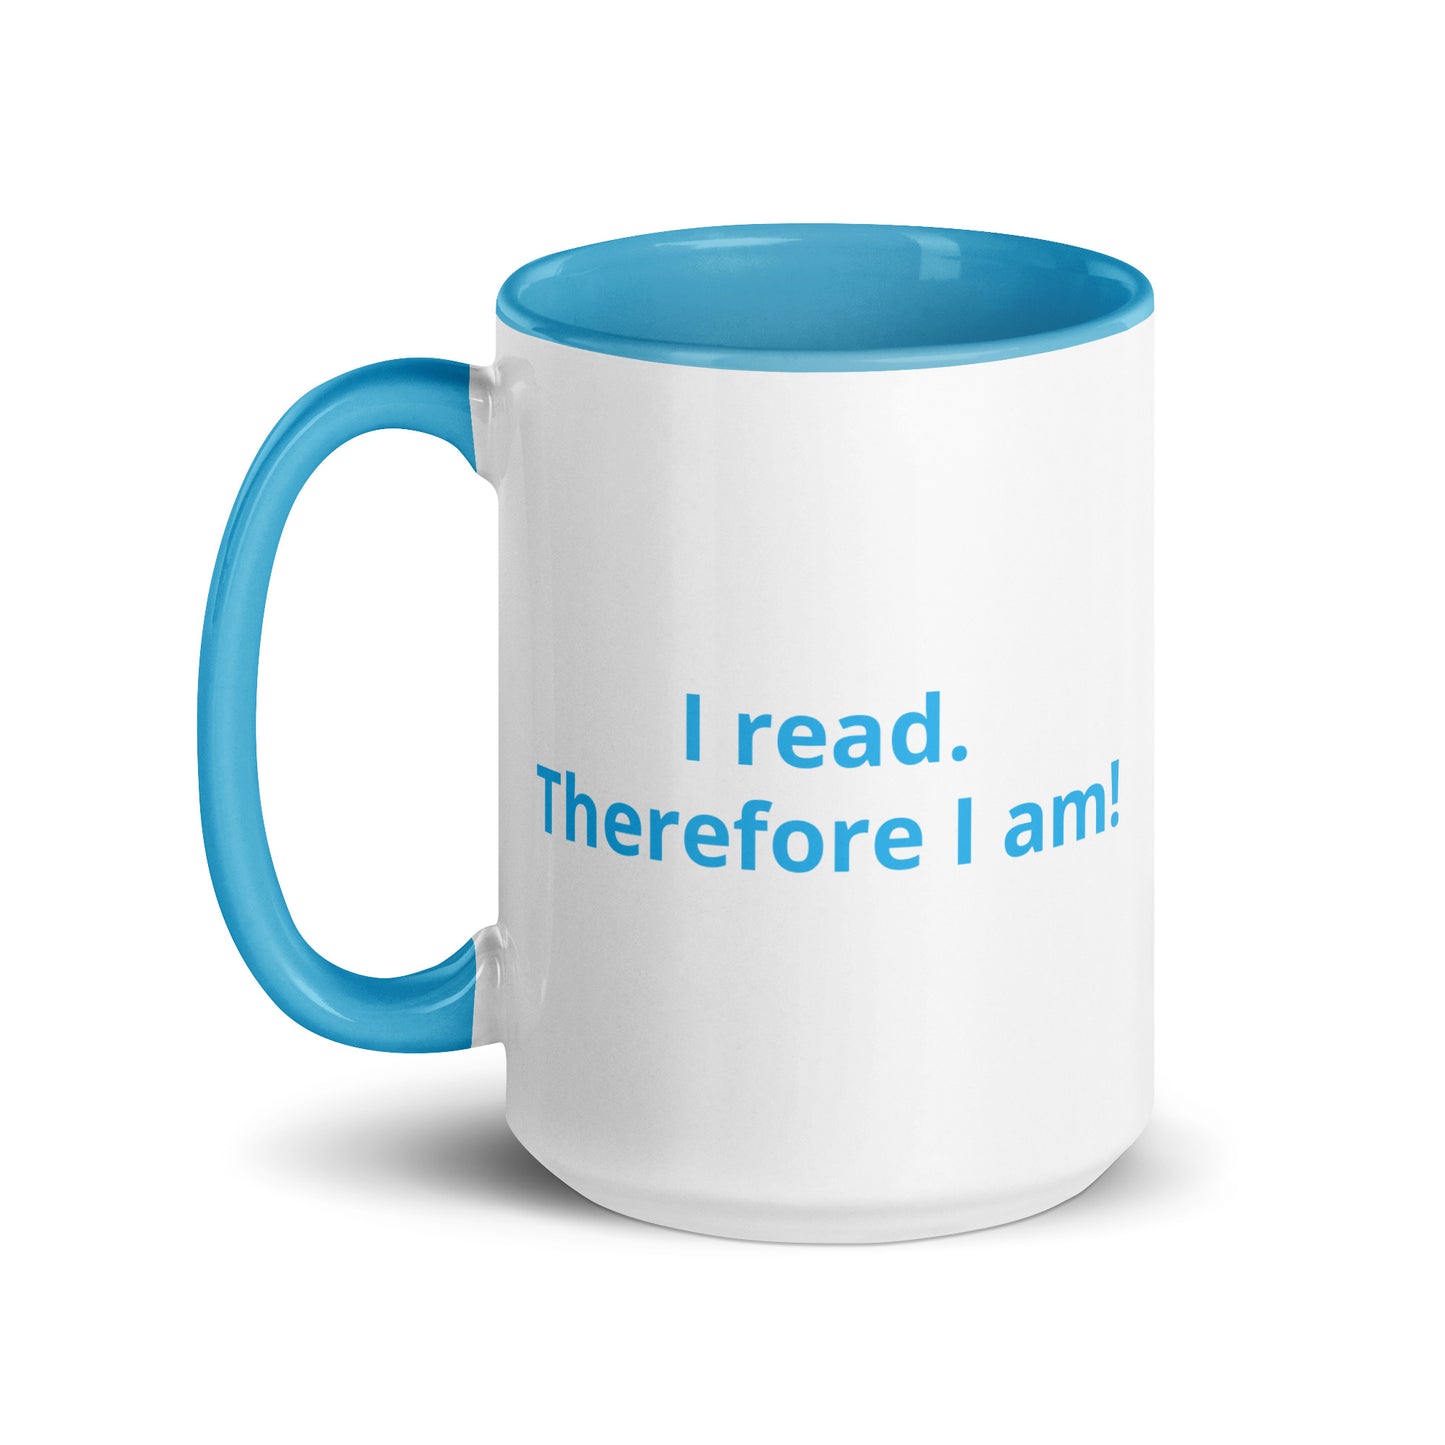 I read. Therefore I am!